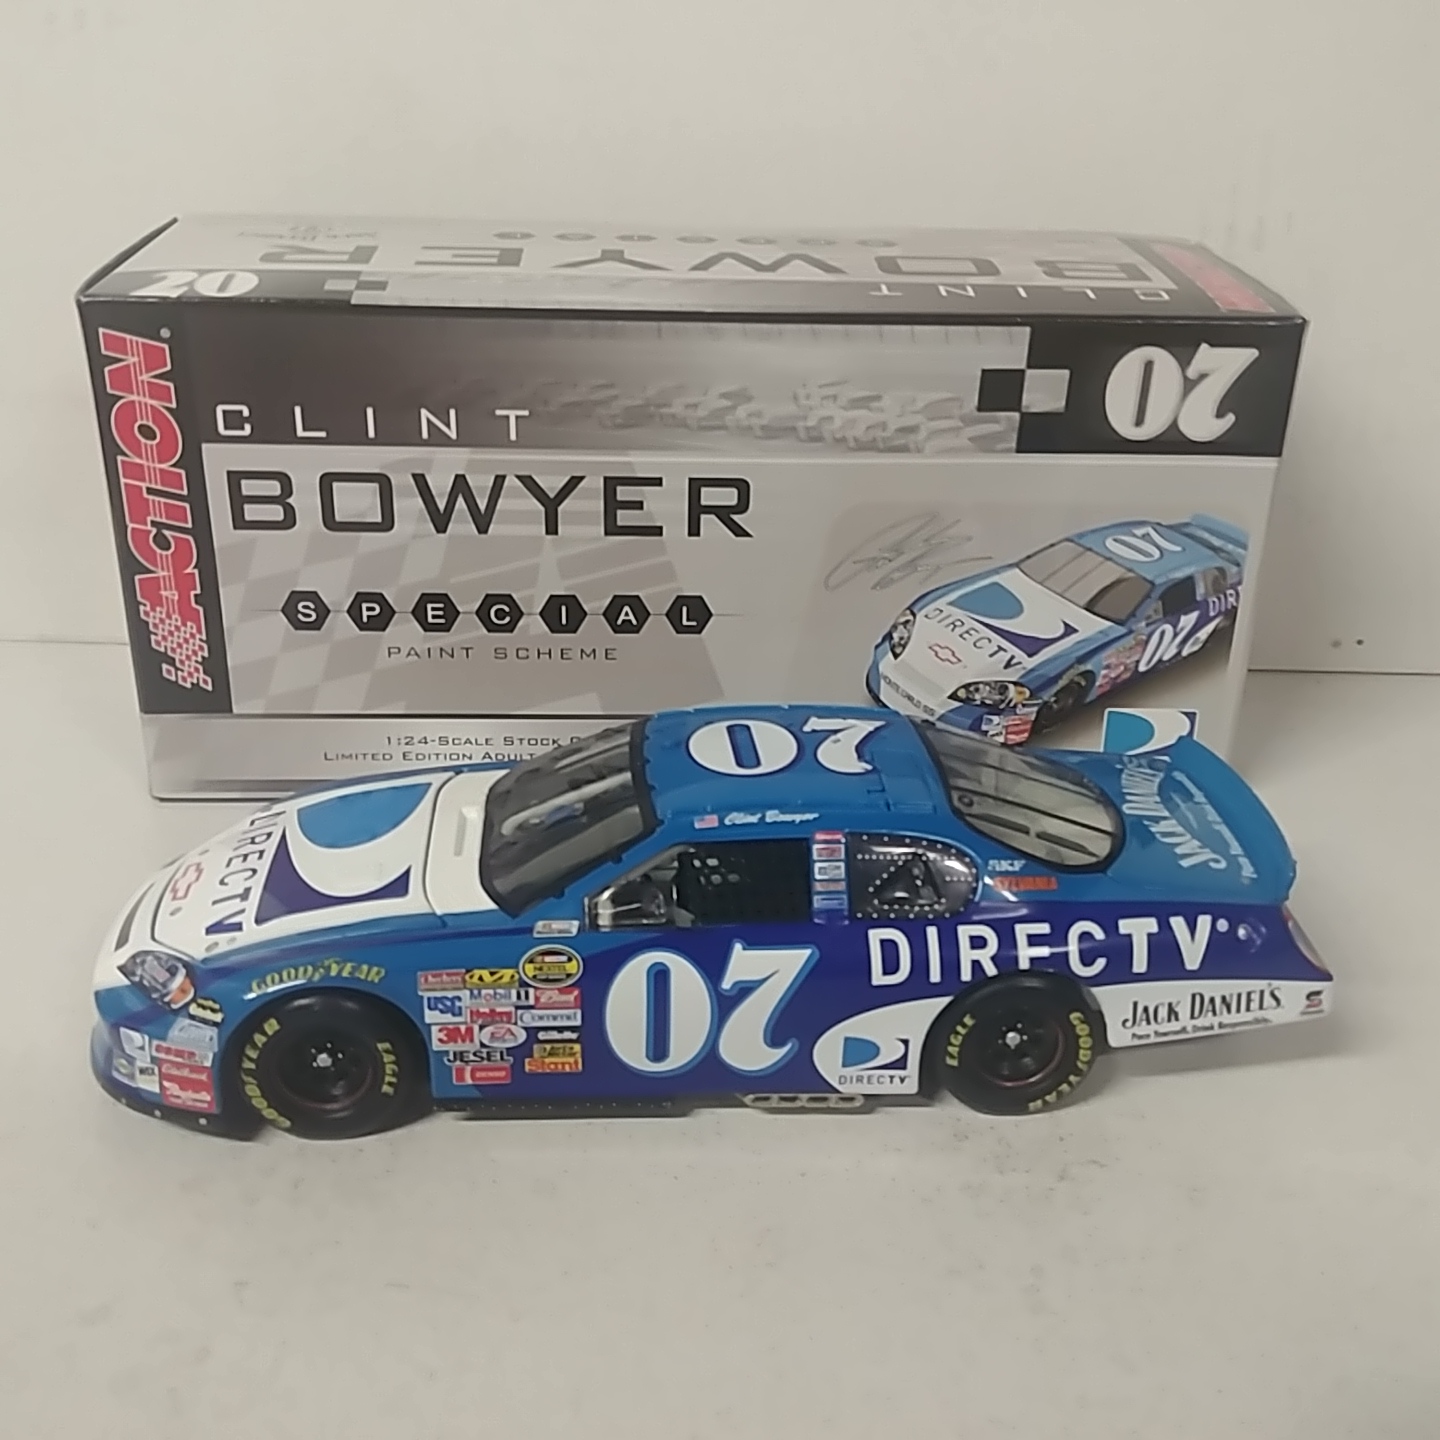 2006 Clint Bowyer 1/24th Direct TV/Jack Daniels Monte Carlo